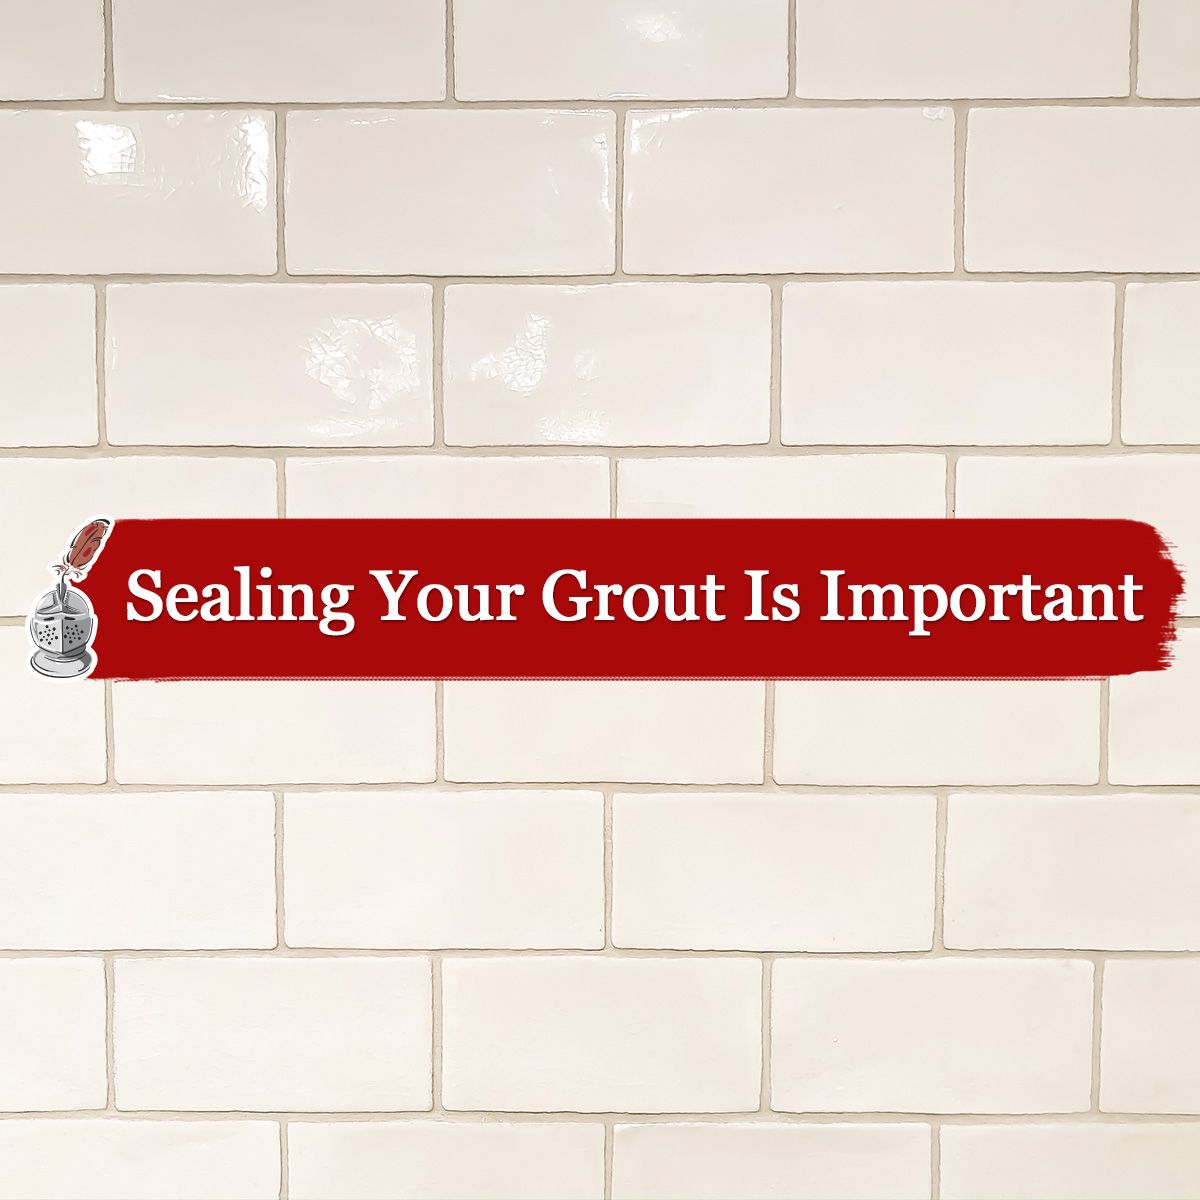 Sealing Your Grout Is Important